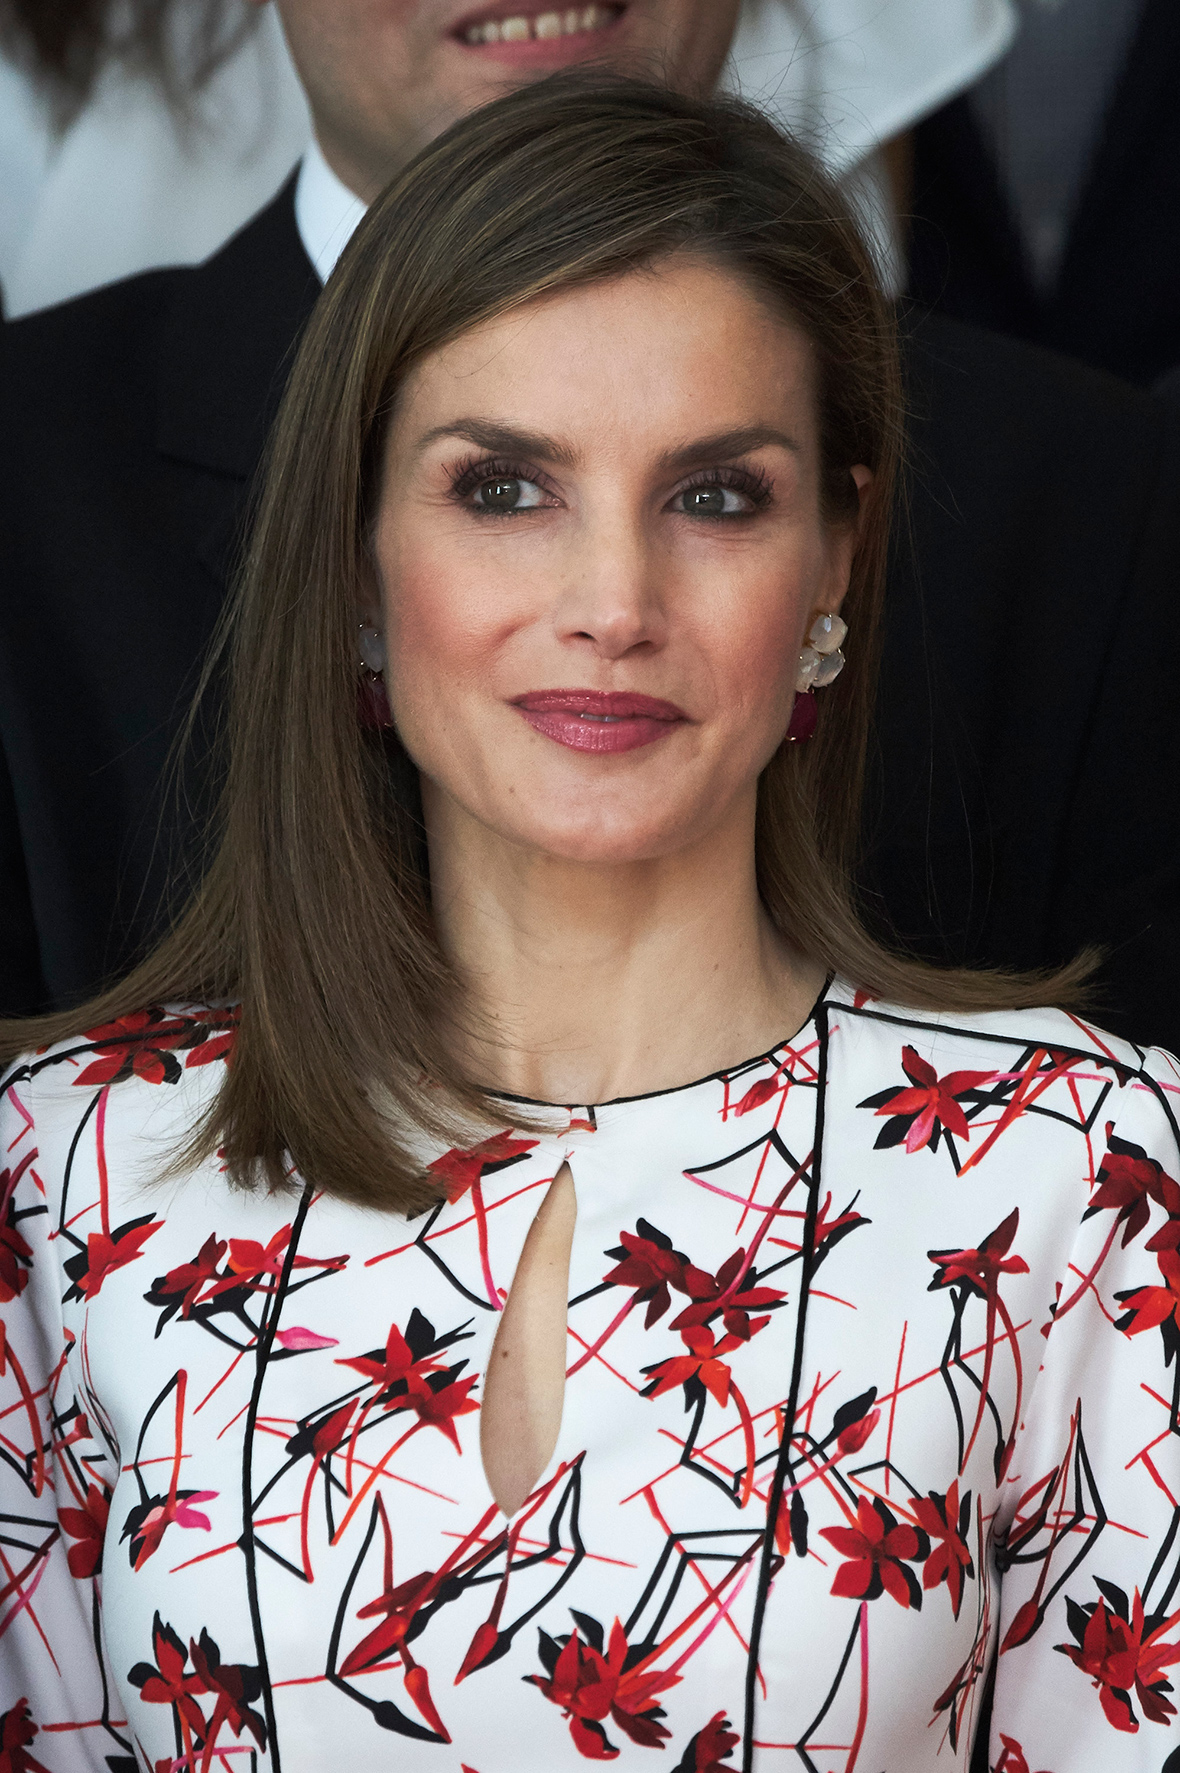 Queen of versatile! Letizia of Spain goes classic in red floral dress day after donning 90s LBD